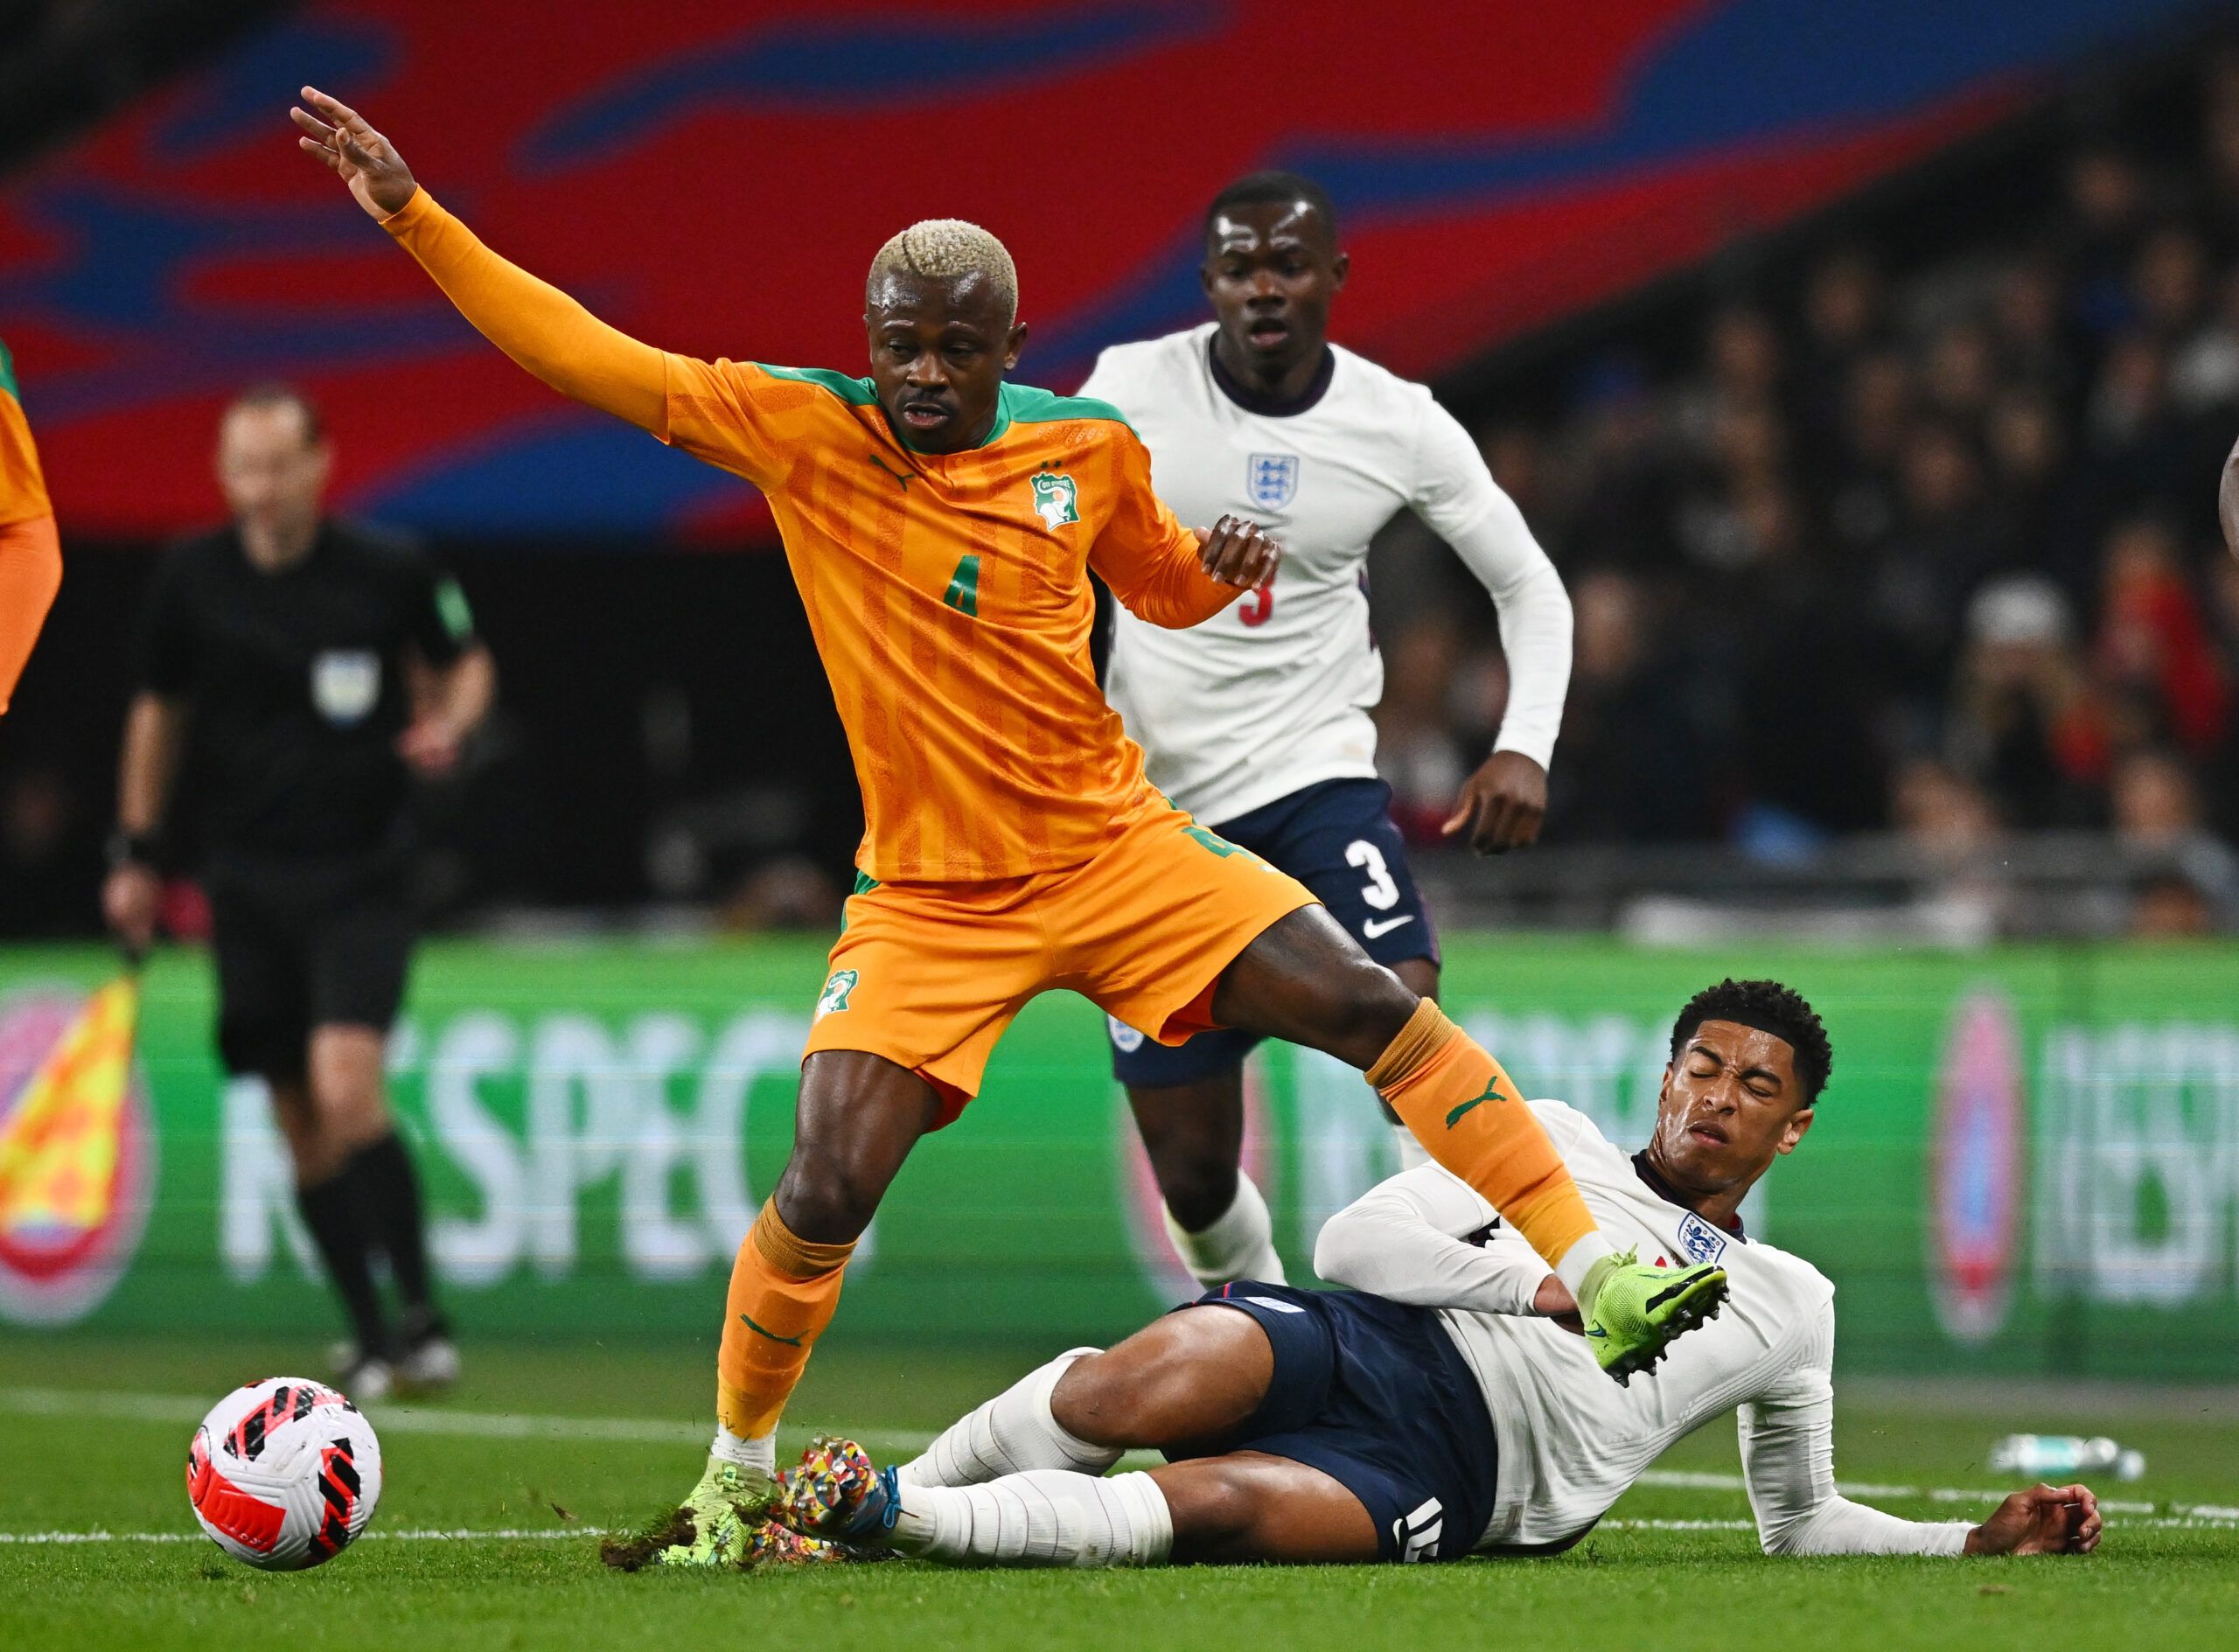 Soccer Football - International Friendly - England v Ivory Coast - Wembley Stadium, London, Britain - March 29, 2022 Ivory Coast's Jean Michael Seri in action with England's Jude Bellingham REUTERS/Dylan Martinez